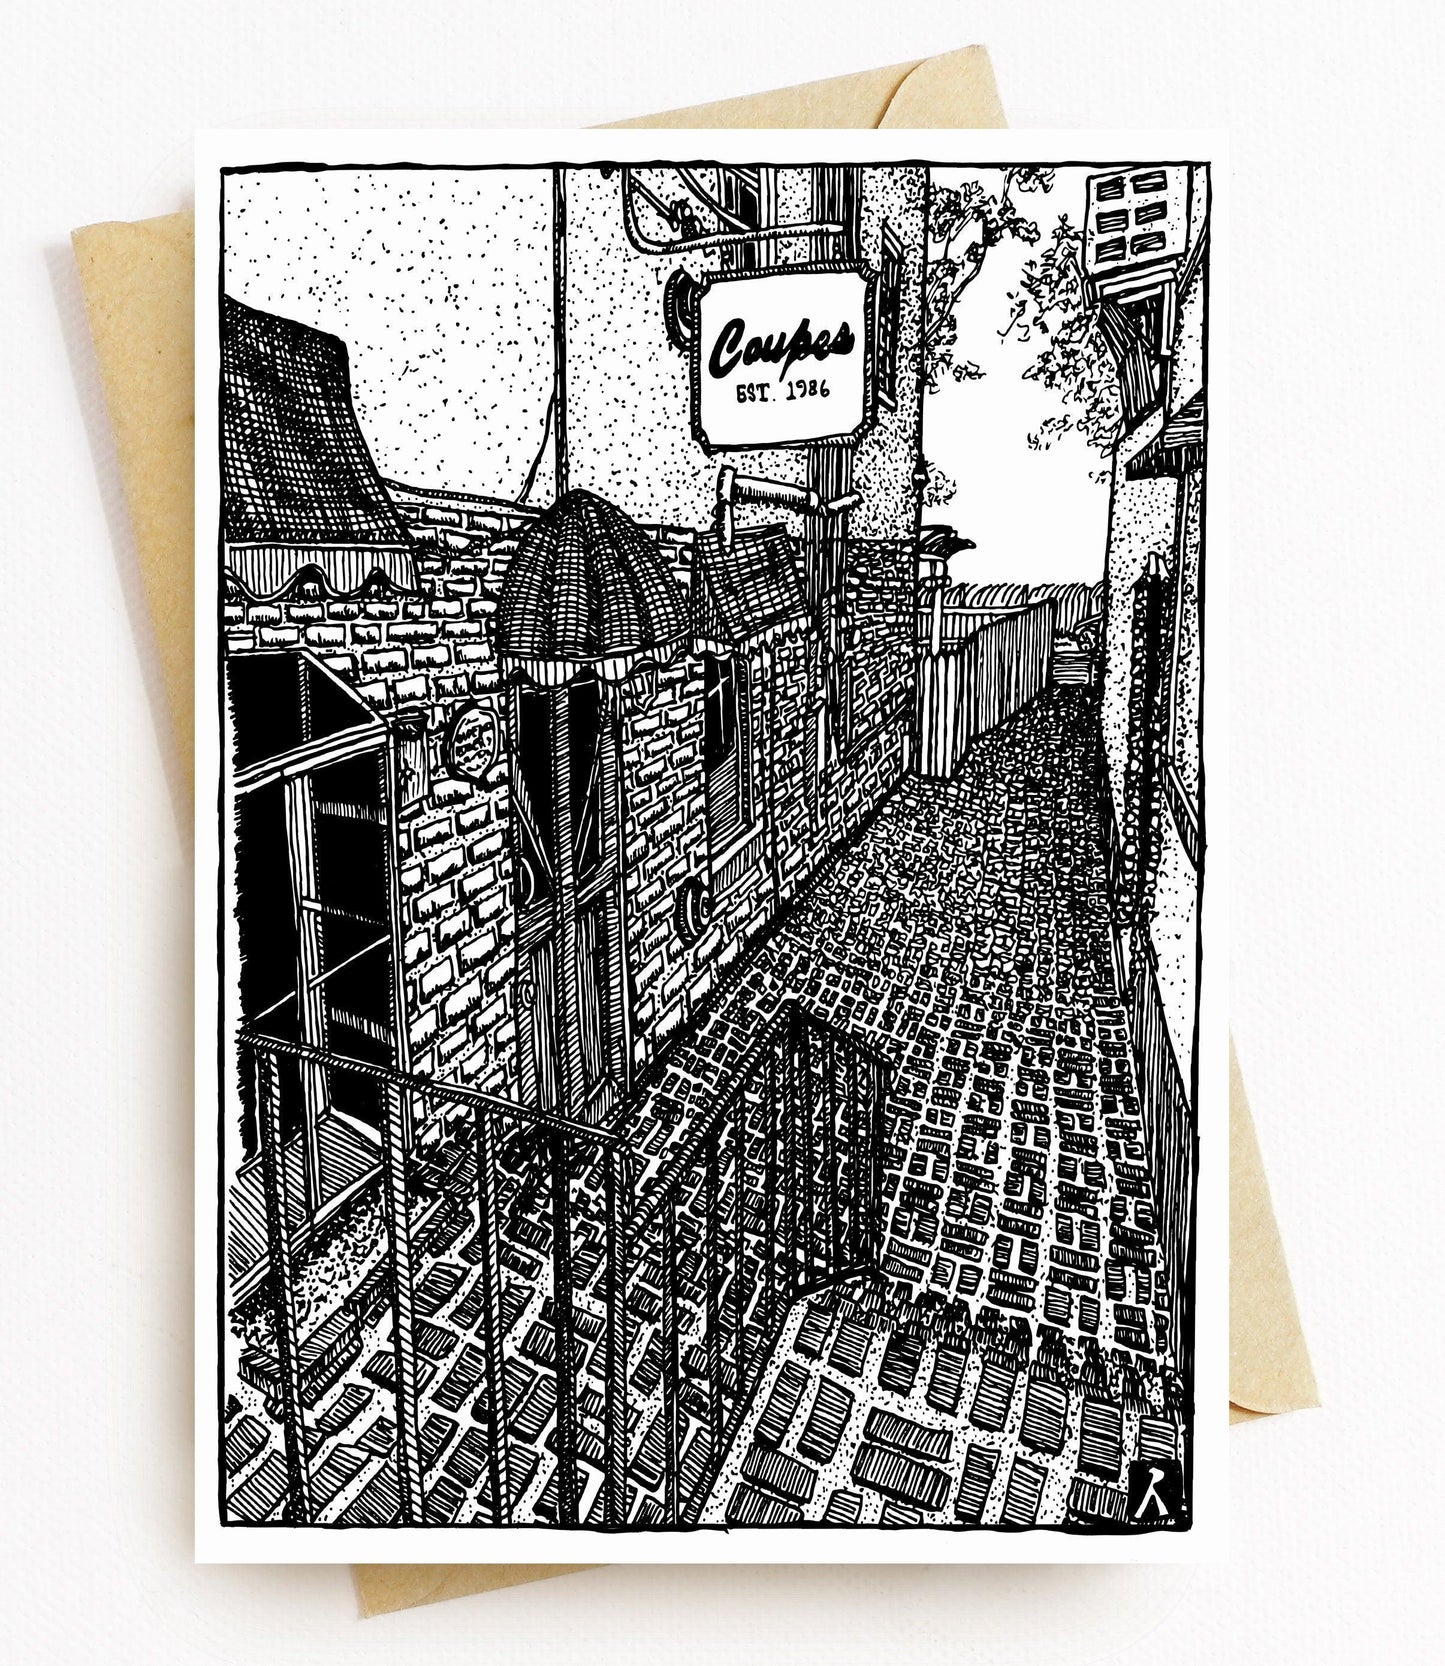 BellavanceInk: Greeting Card With A Pen & Ink Drawing Of Coupe's Bar On Elliewood In Charlottesville  5 x 7 Inches - BellavanceInk